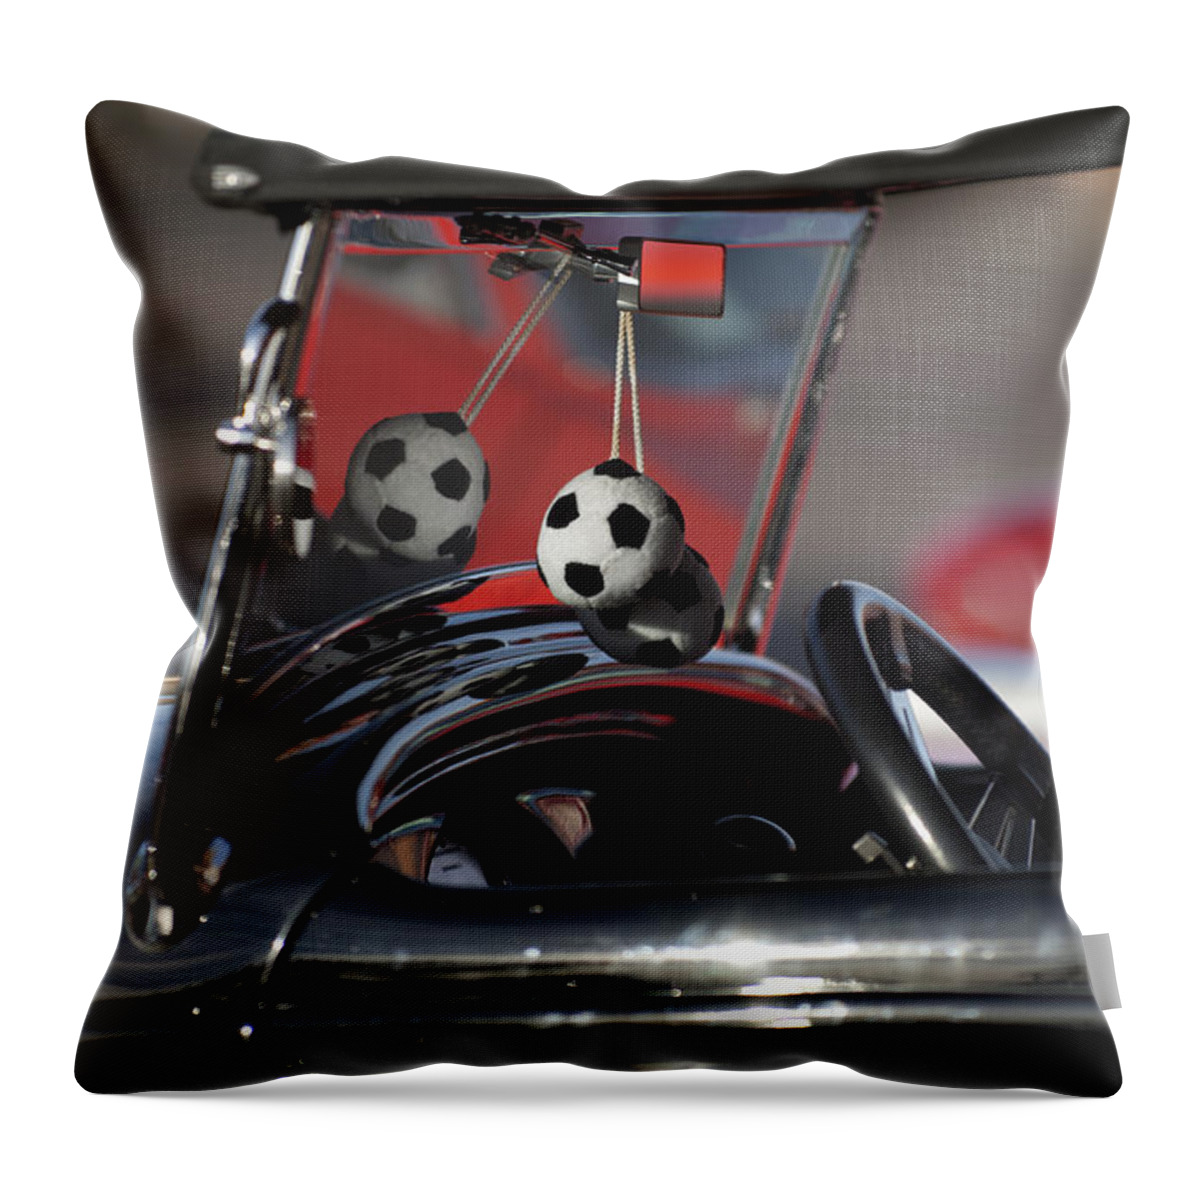 1932 Ford Roadster Throw Pillow featuring the photograph 1932 Ford Roadster Fuzzy Dice by Jill Reger